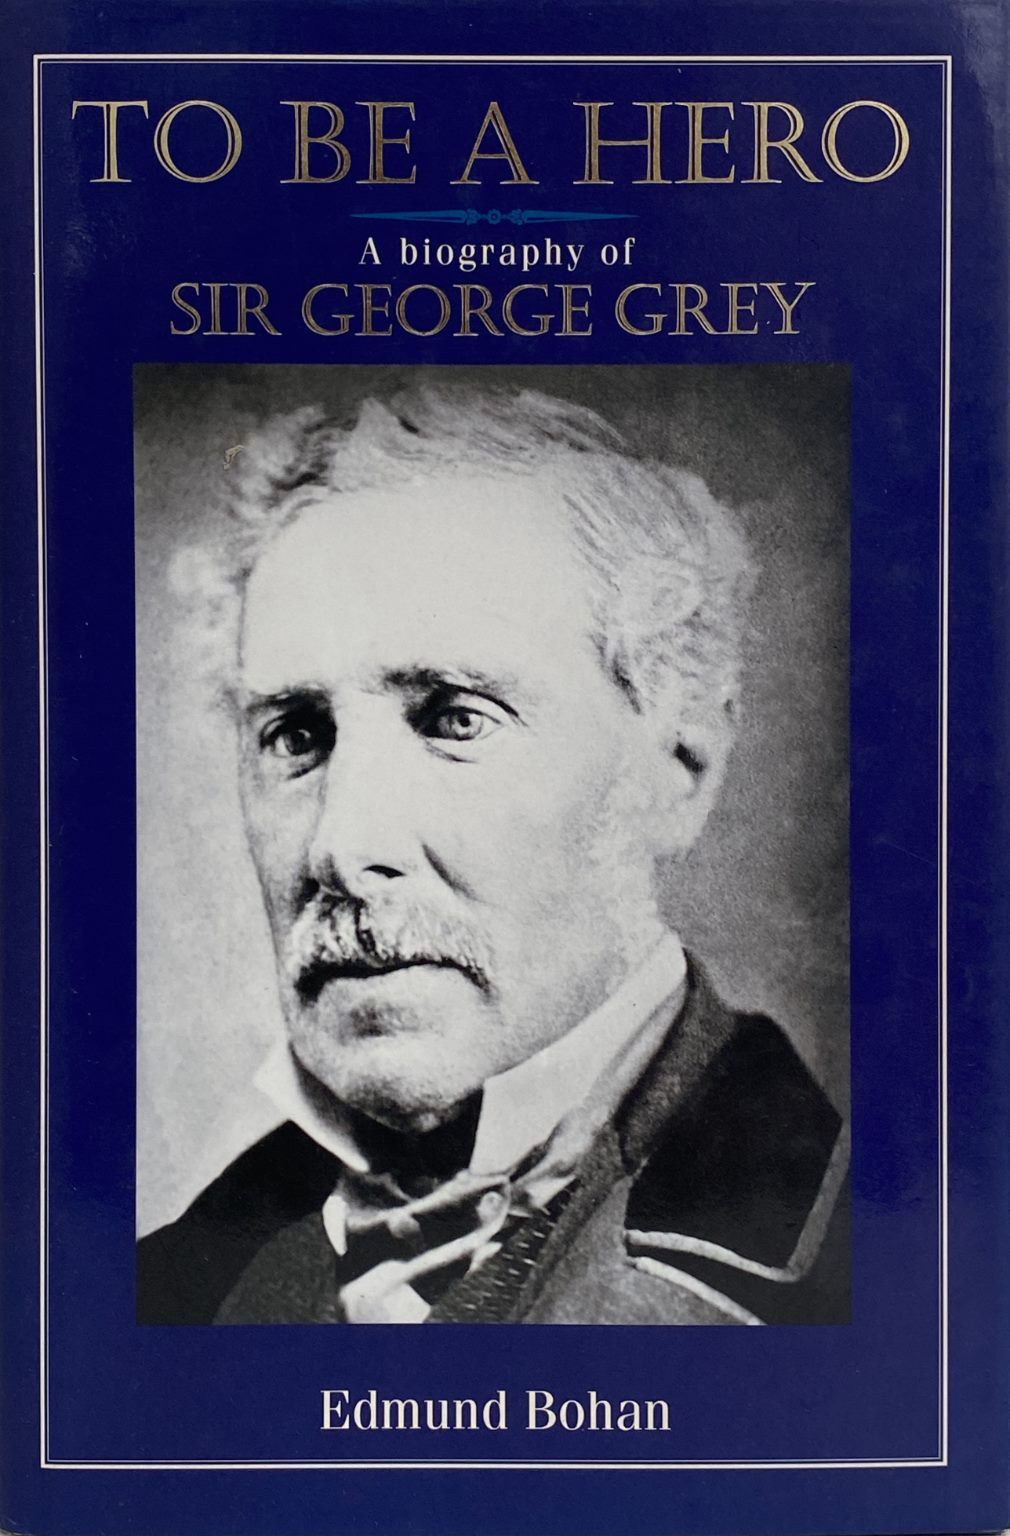 TO BE A HERO: A Biography of Sir George Grey